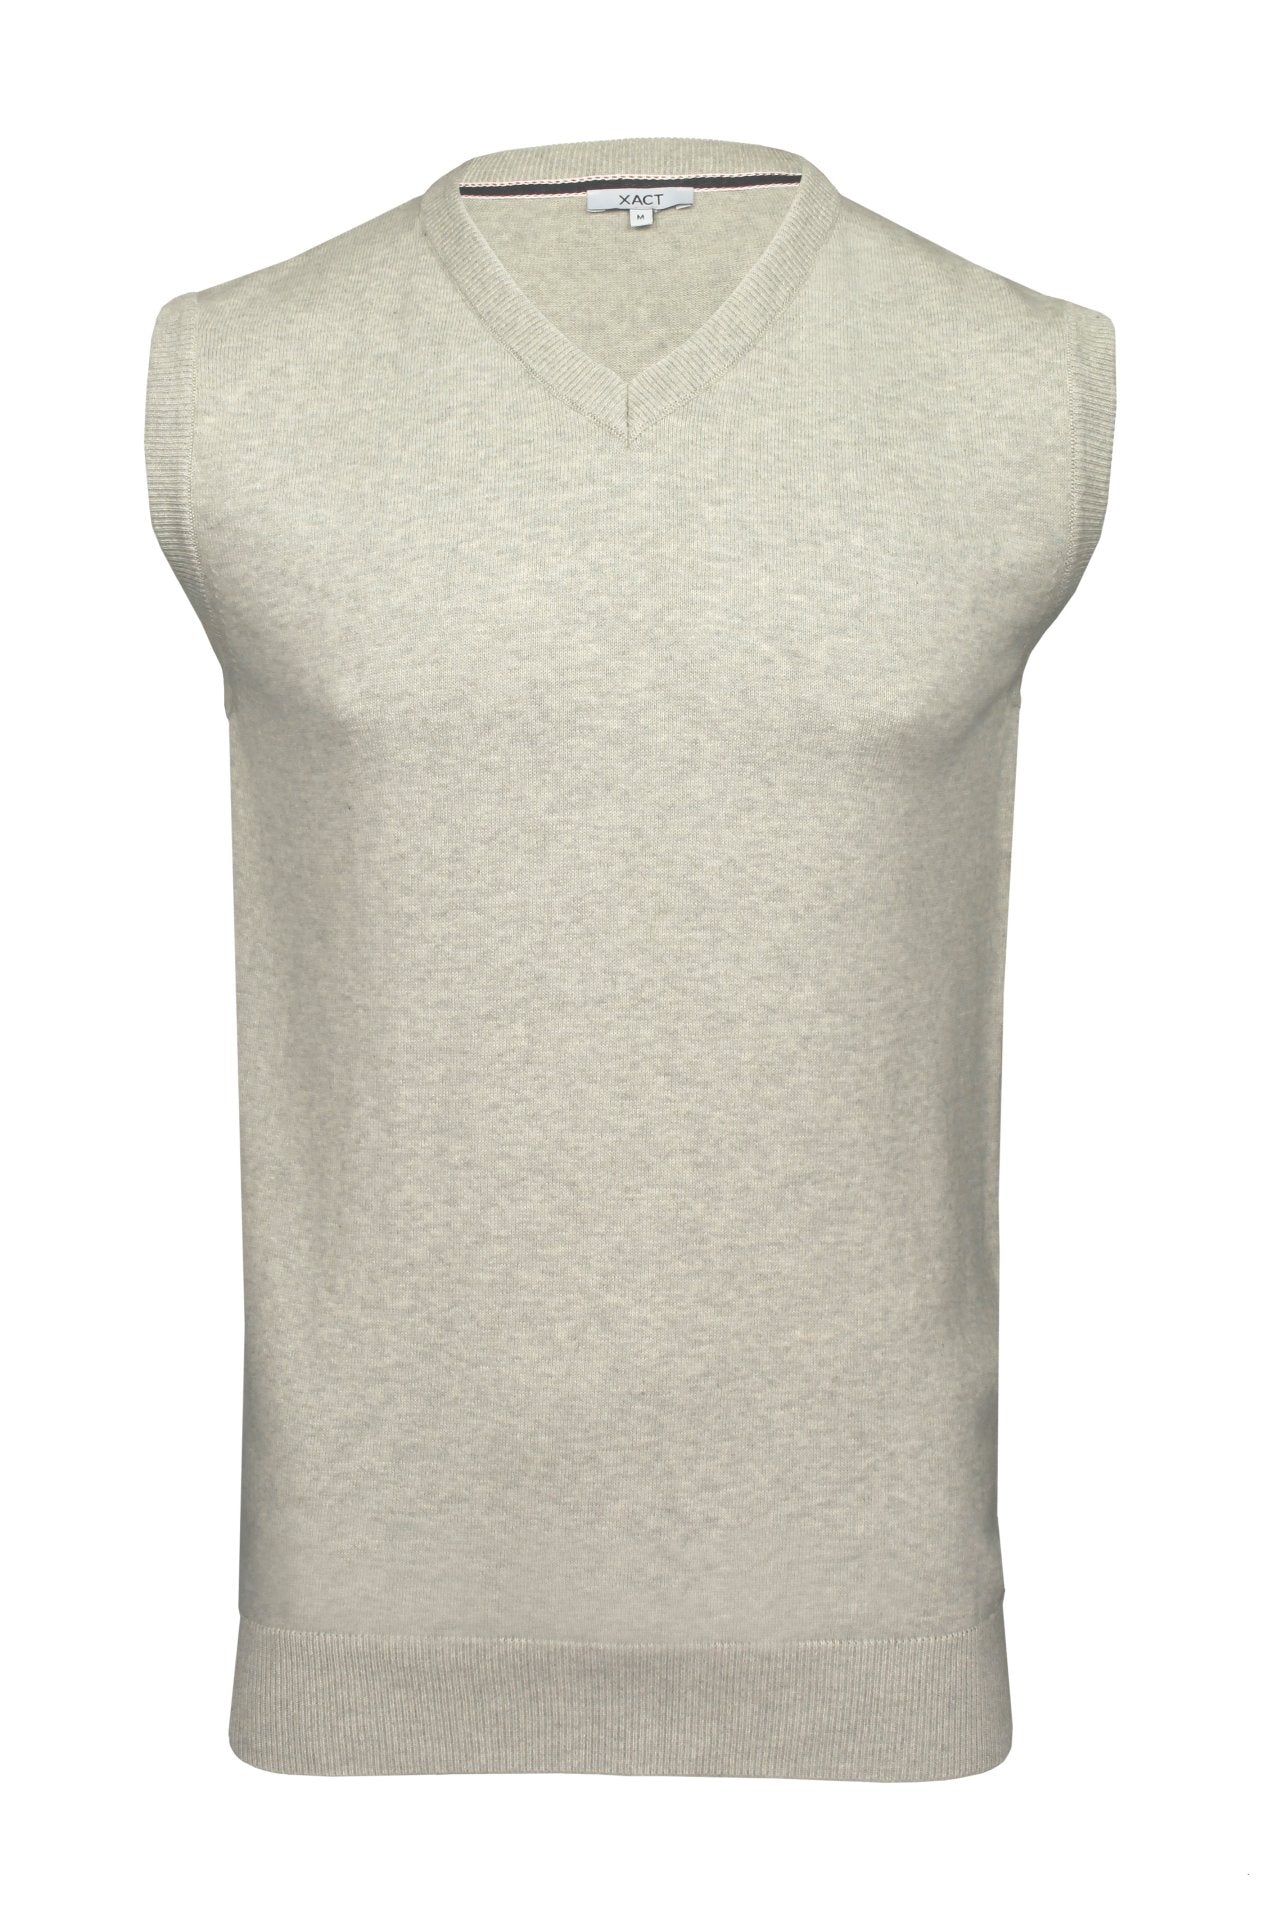 Xact Mens Knitted Sleeveless Vest/ Tank Top Jumper - 100% Cotton-Main Image